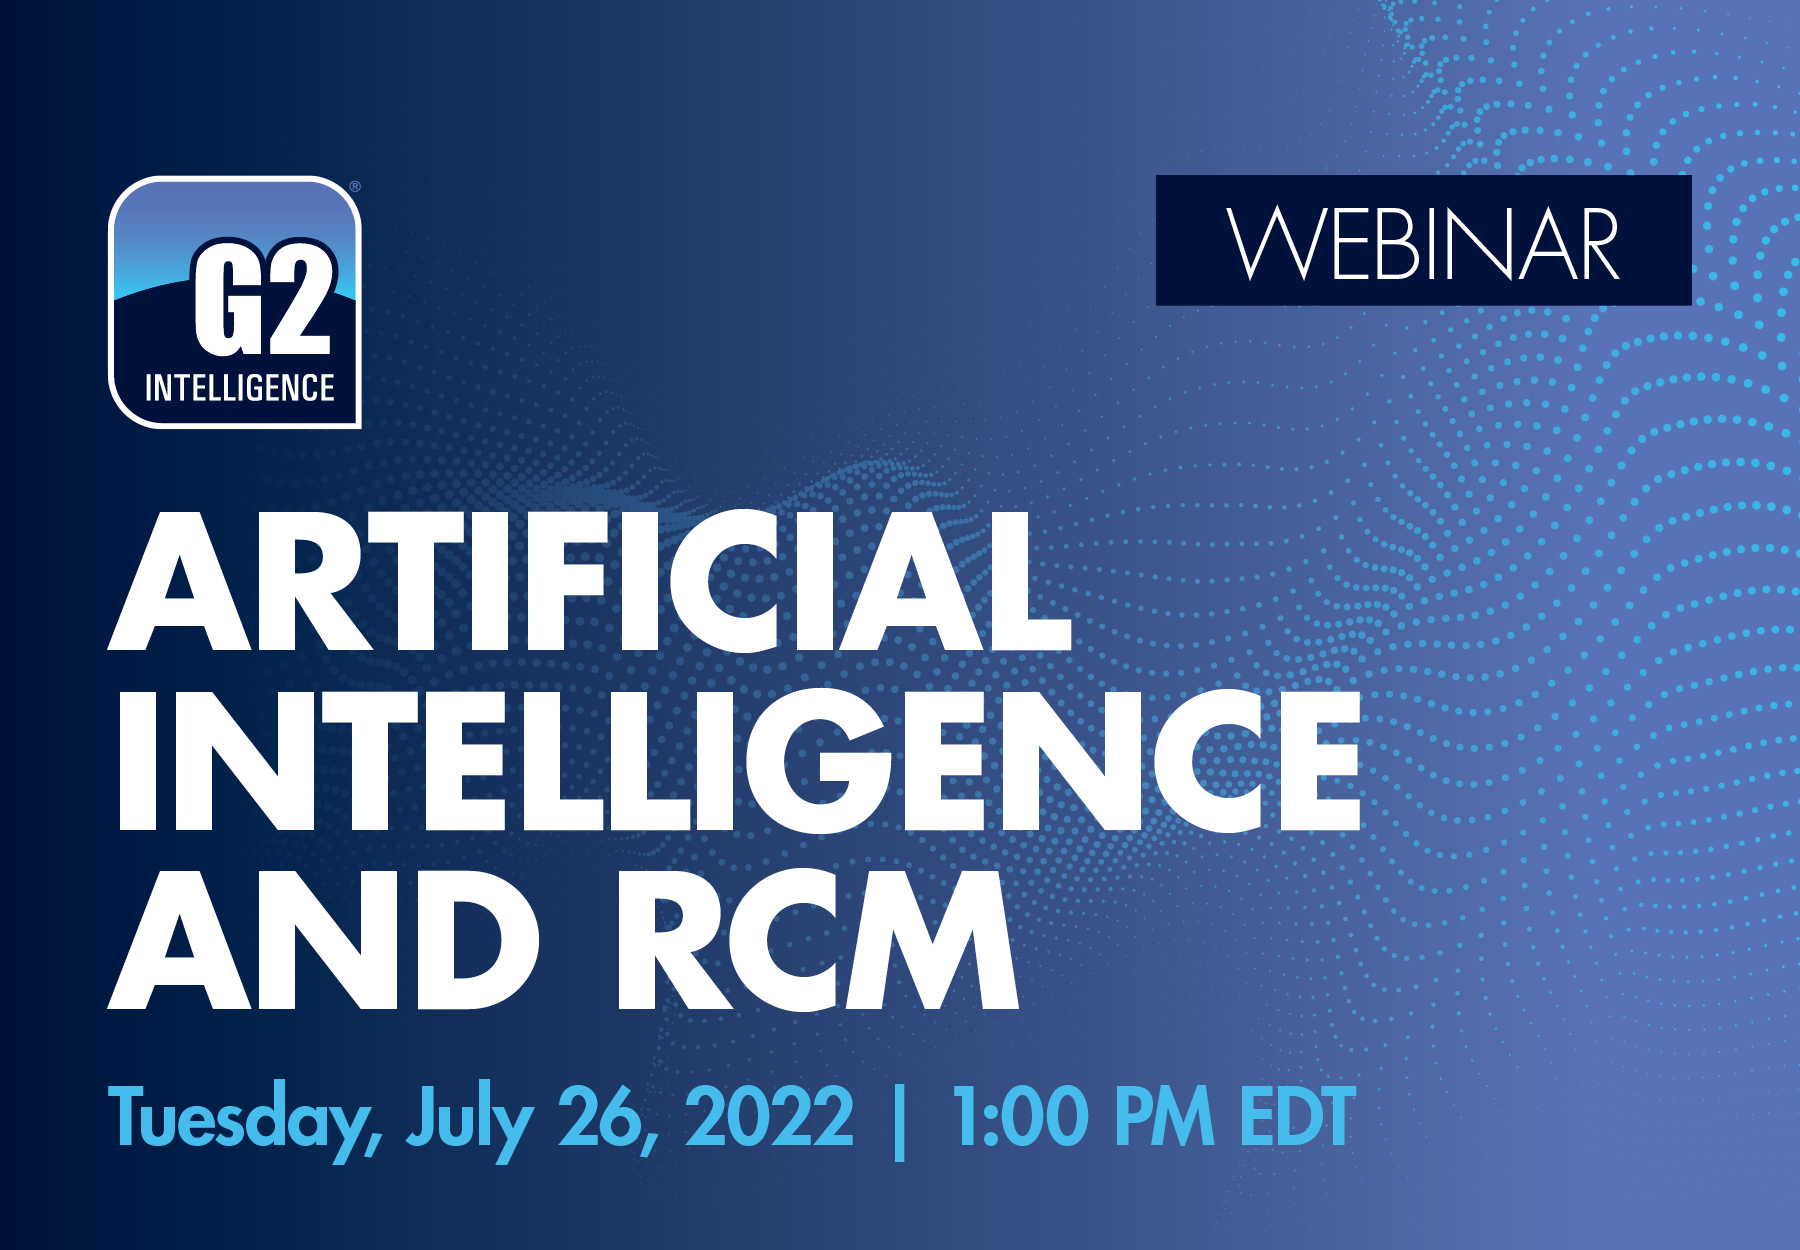 Blue promo image for July 26, 2022 G2 Webinar, "Artificial Intelligence and RCM"